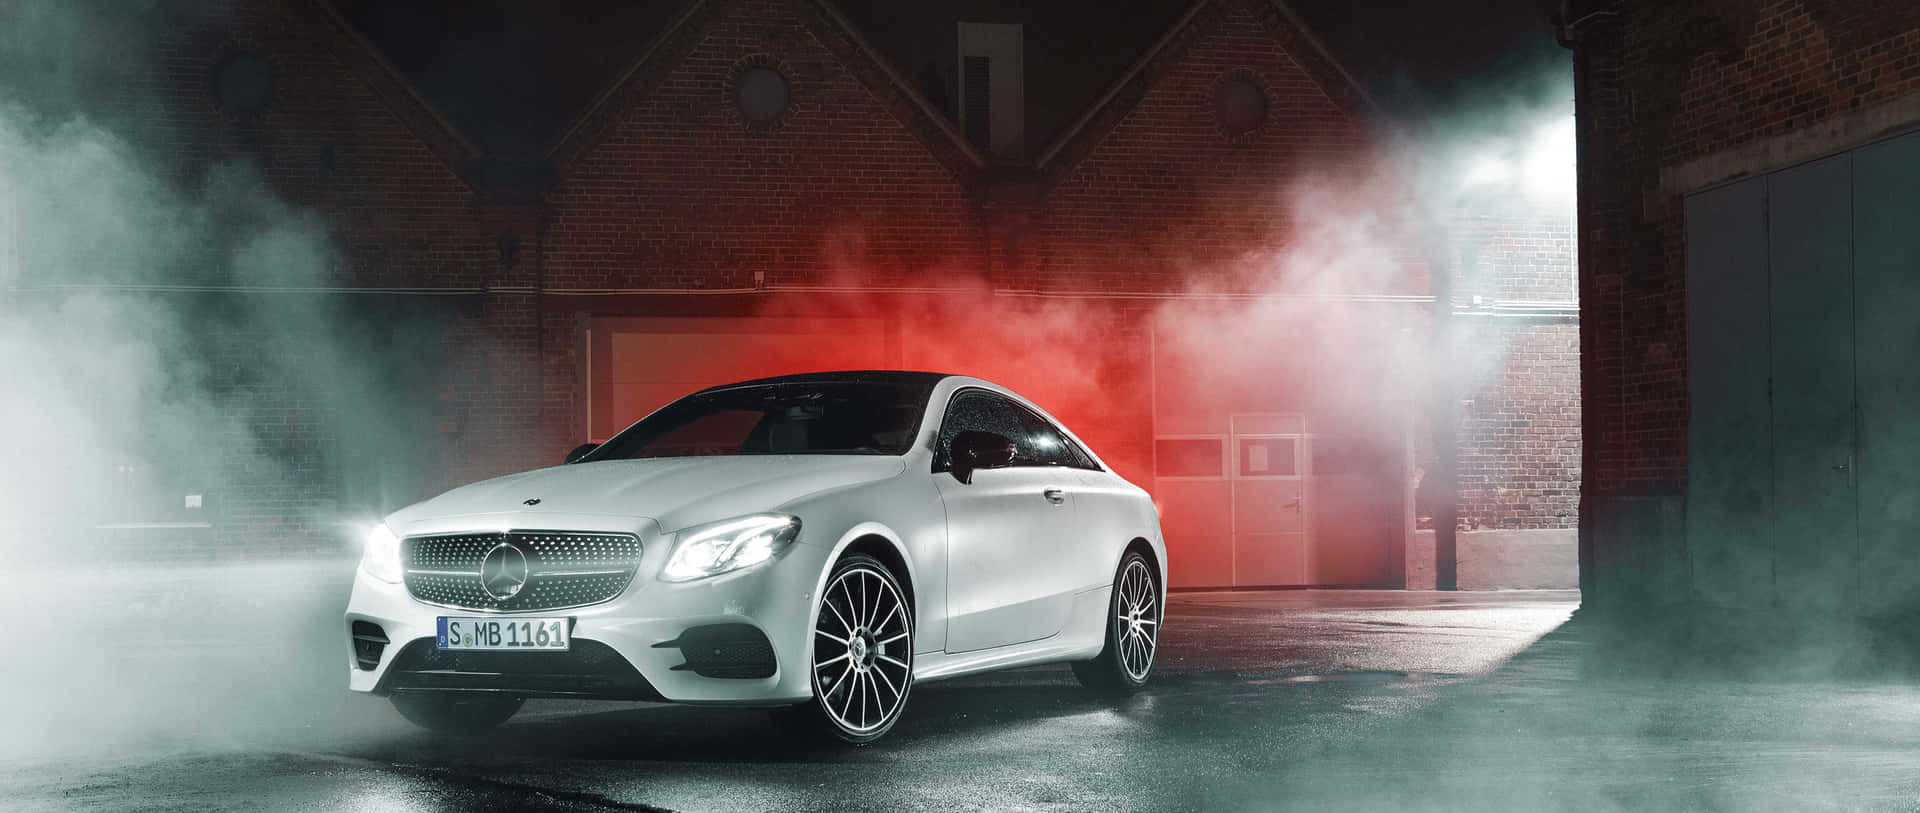 Take your everyday commute to new heights with the timeless Mercedes Car 4K. Wallpaper